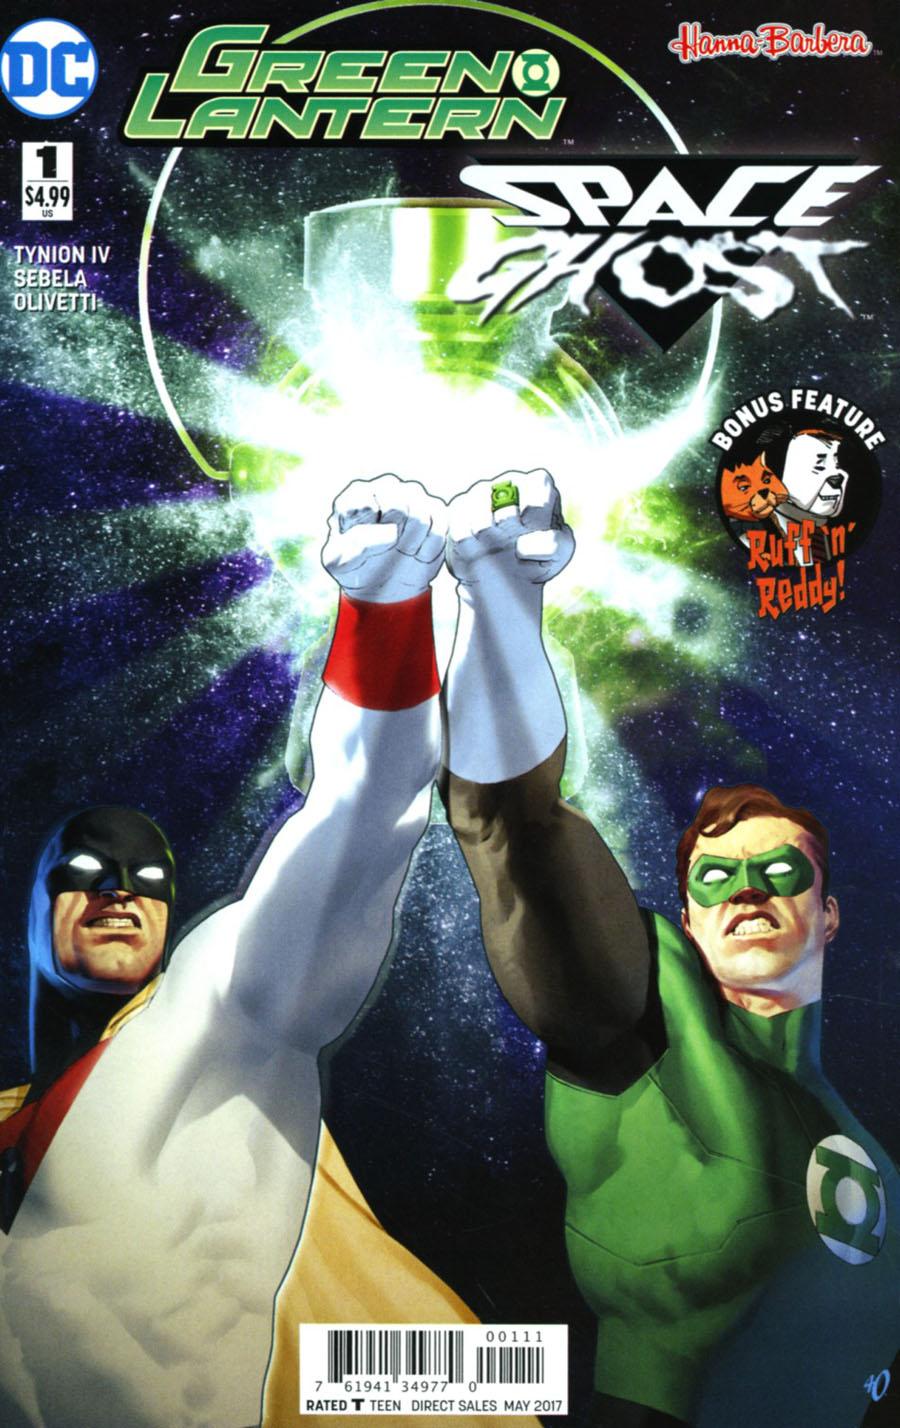 Green Lantern Space Ghost Special Vol. 1 #1